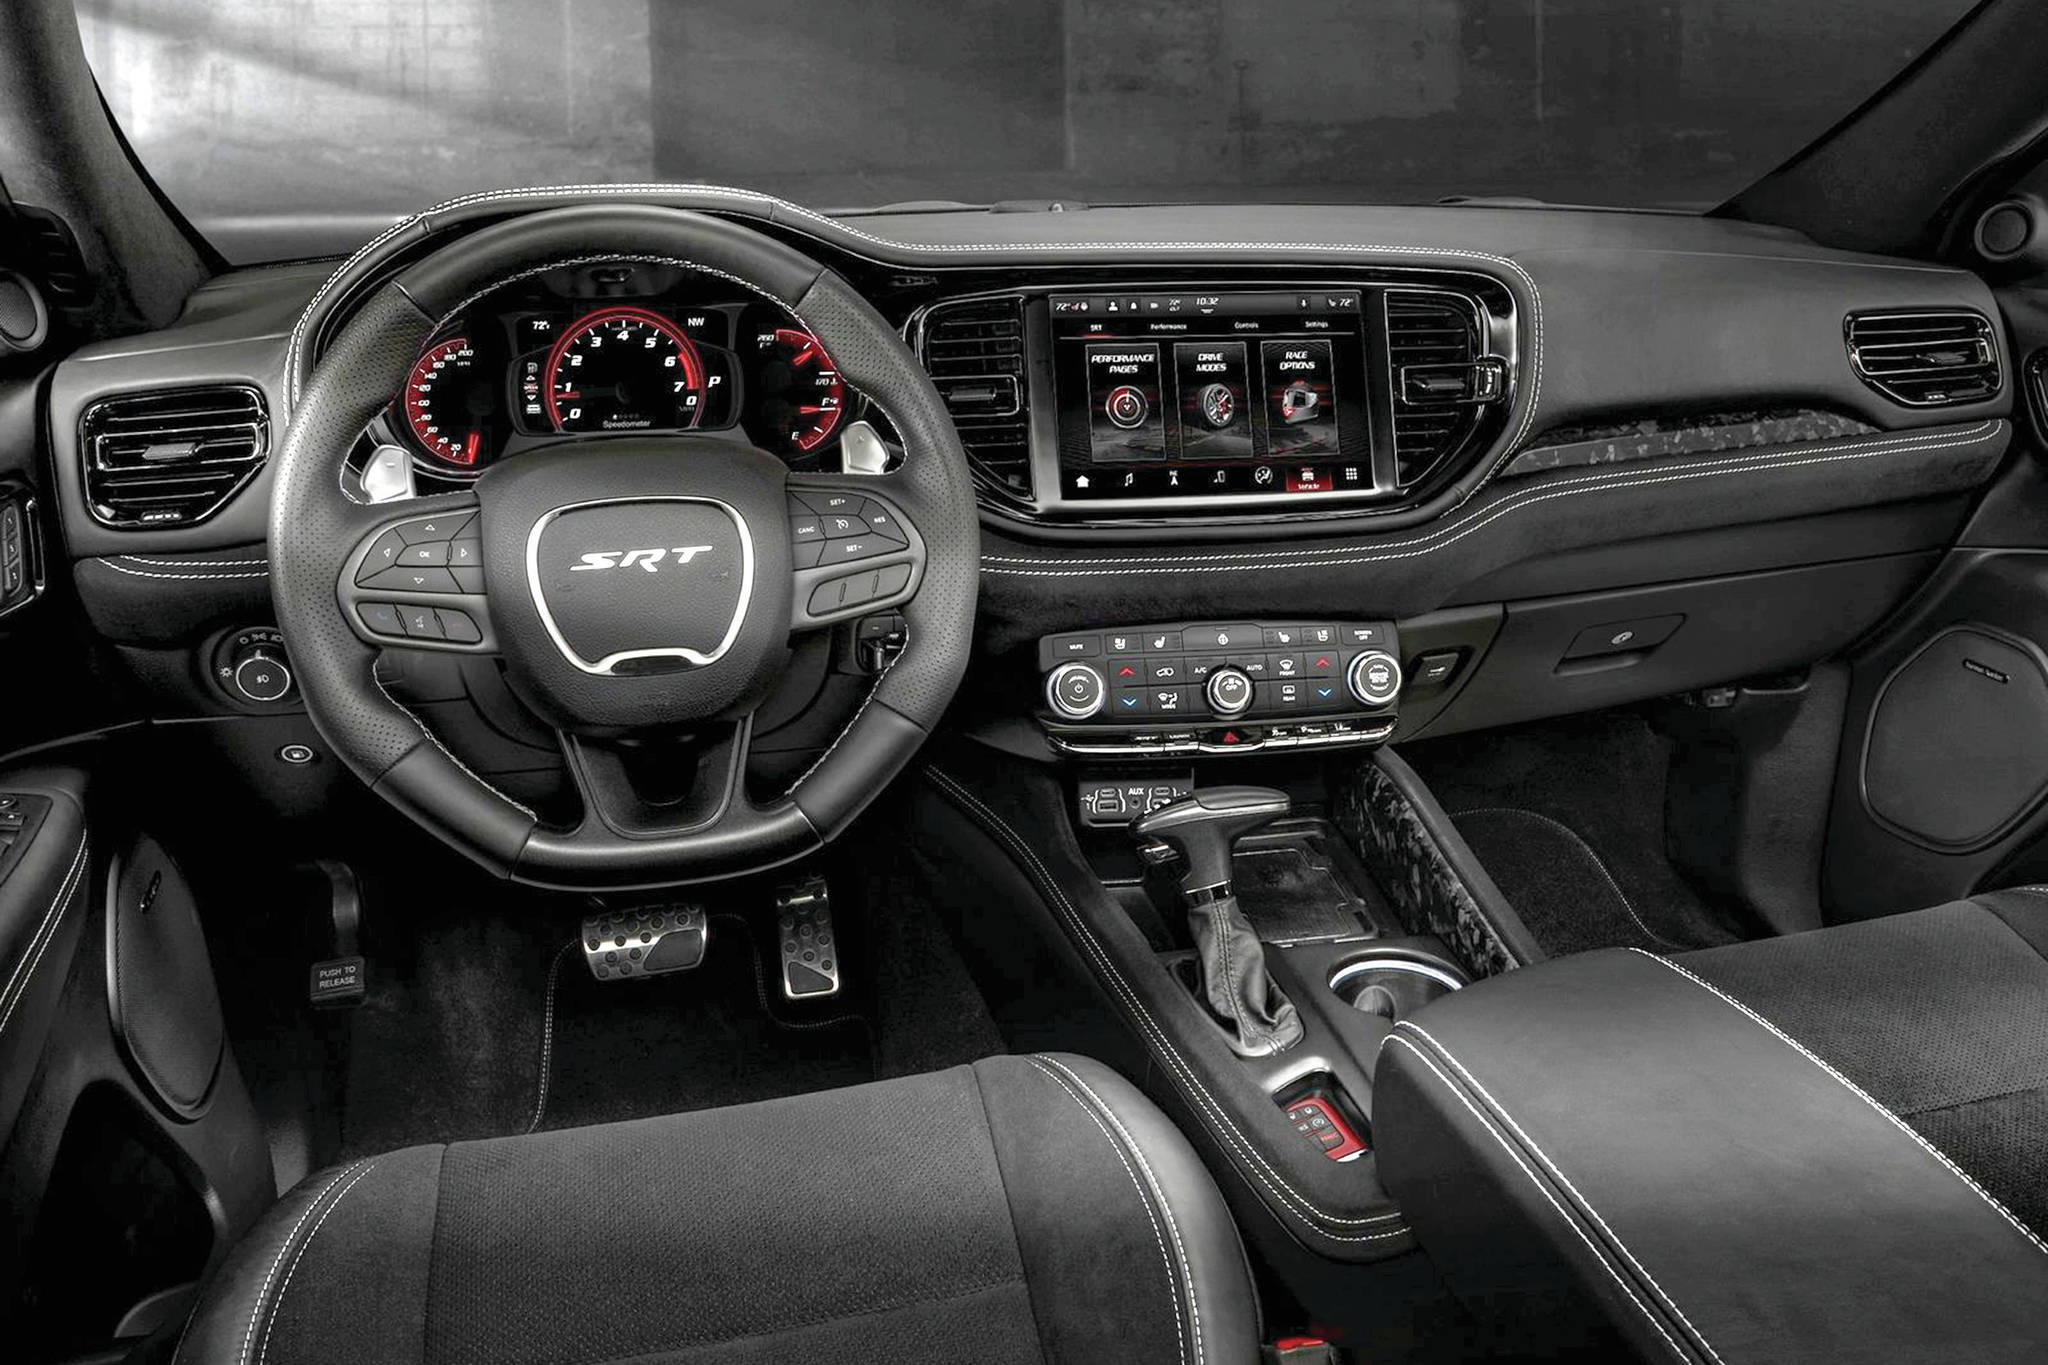 Dodge says the Durango’s dash layout is driver-centric, like that of the Dodge Challenger, and that the Uconnect infotainment system is five times faster. Note the available 10.1-inch screen. PHOTO: DODGE